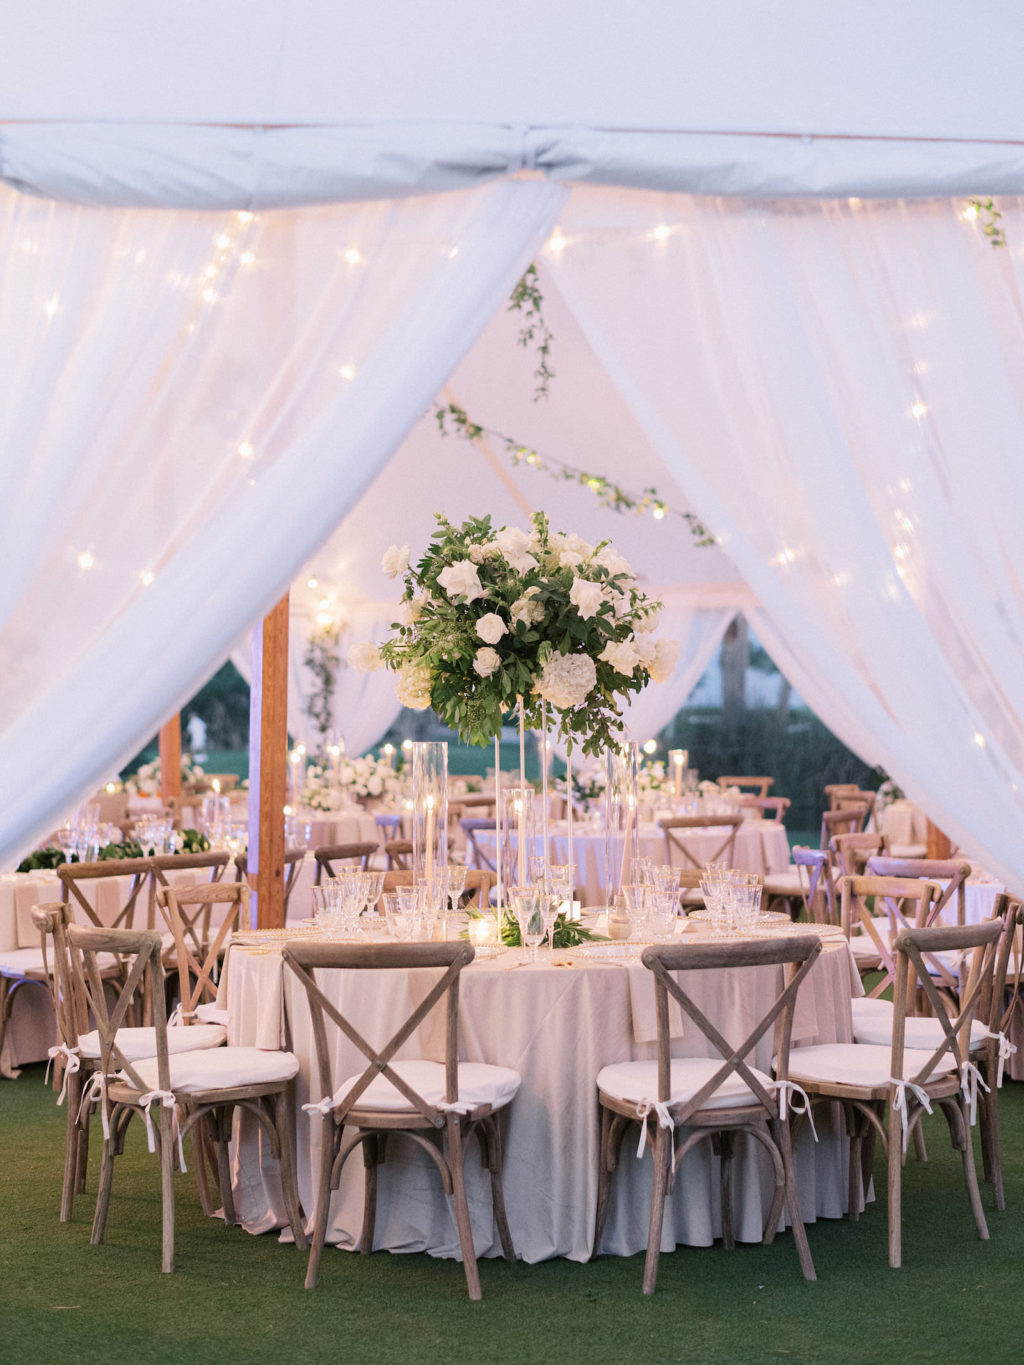 Luxurious Elegant Classic Florida Outdoor Tent Wedding Reception Decor, White Linen Draping, String Lights, Tall White and Greenery Floral Centerpiece, Wooden Cross Back Chairs